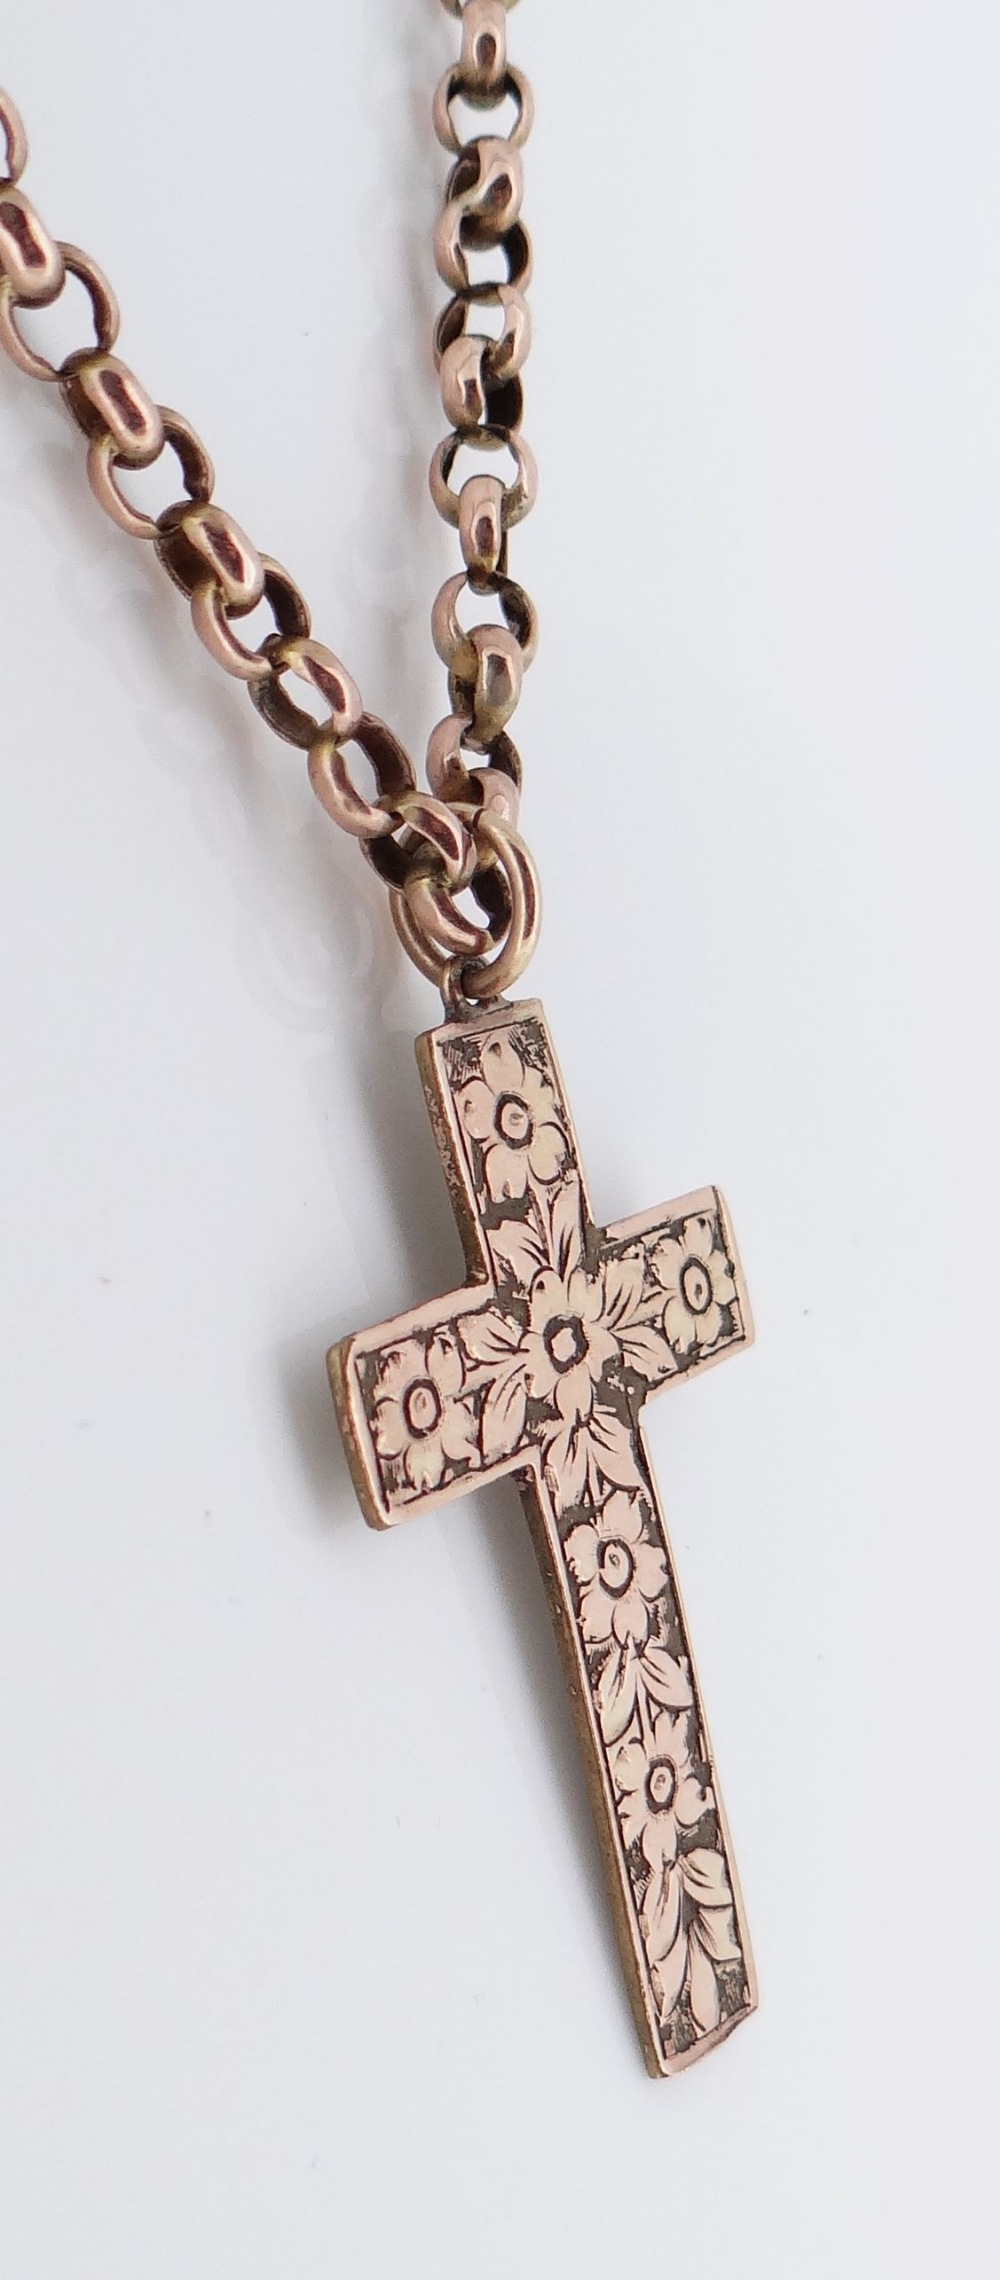 FLORALLY ENGRAVED CROSS PENDANT on 9ct gold chain, the chain weighing 6.9gms - Image 2 of 9